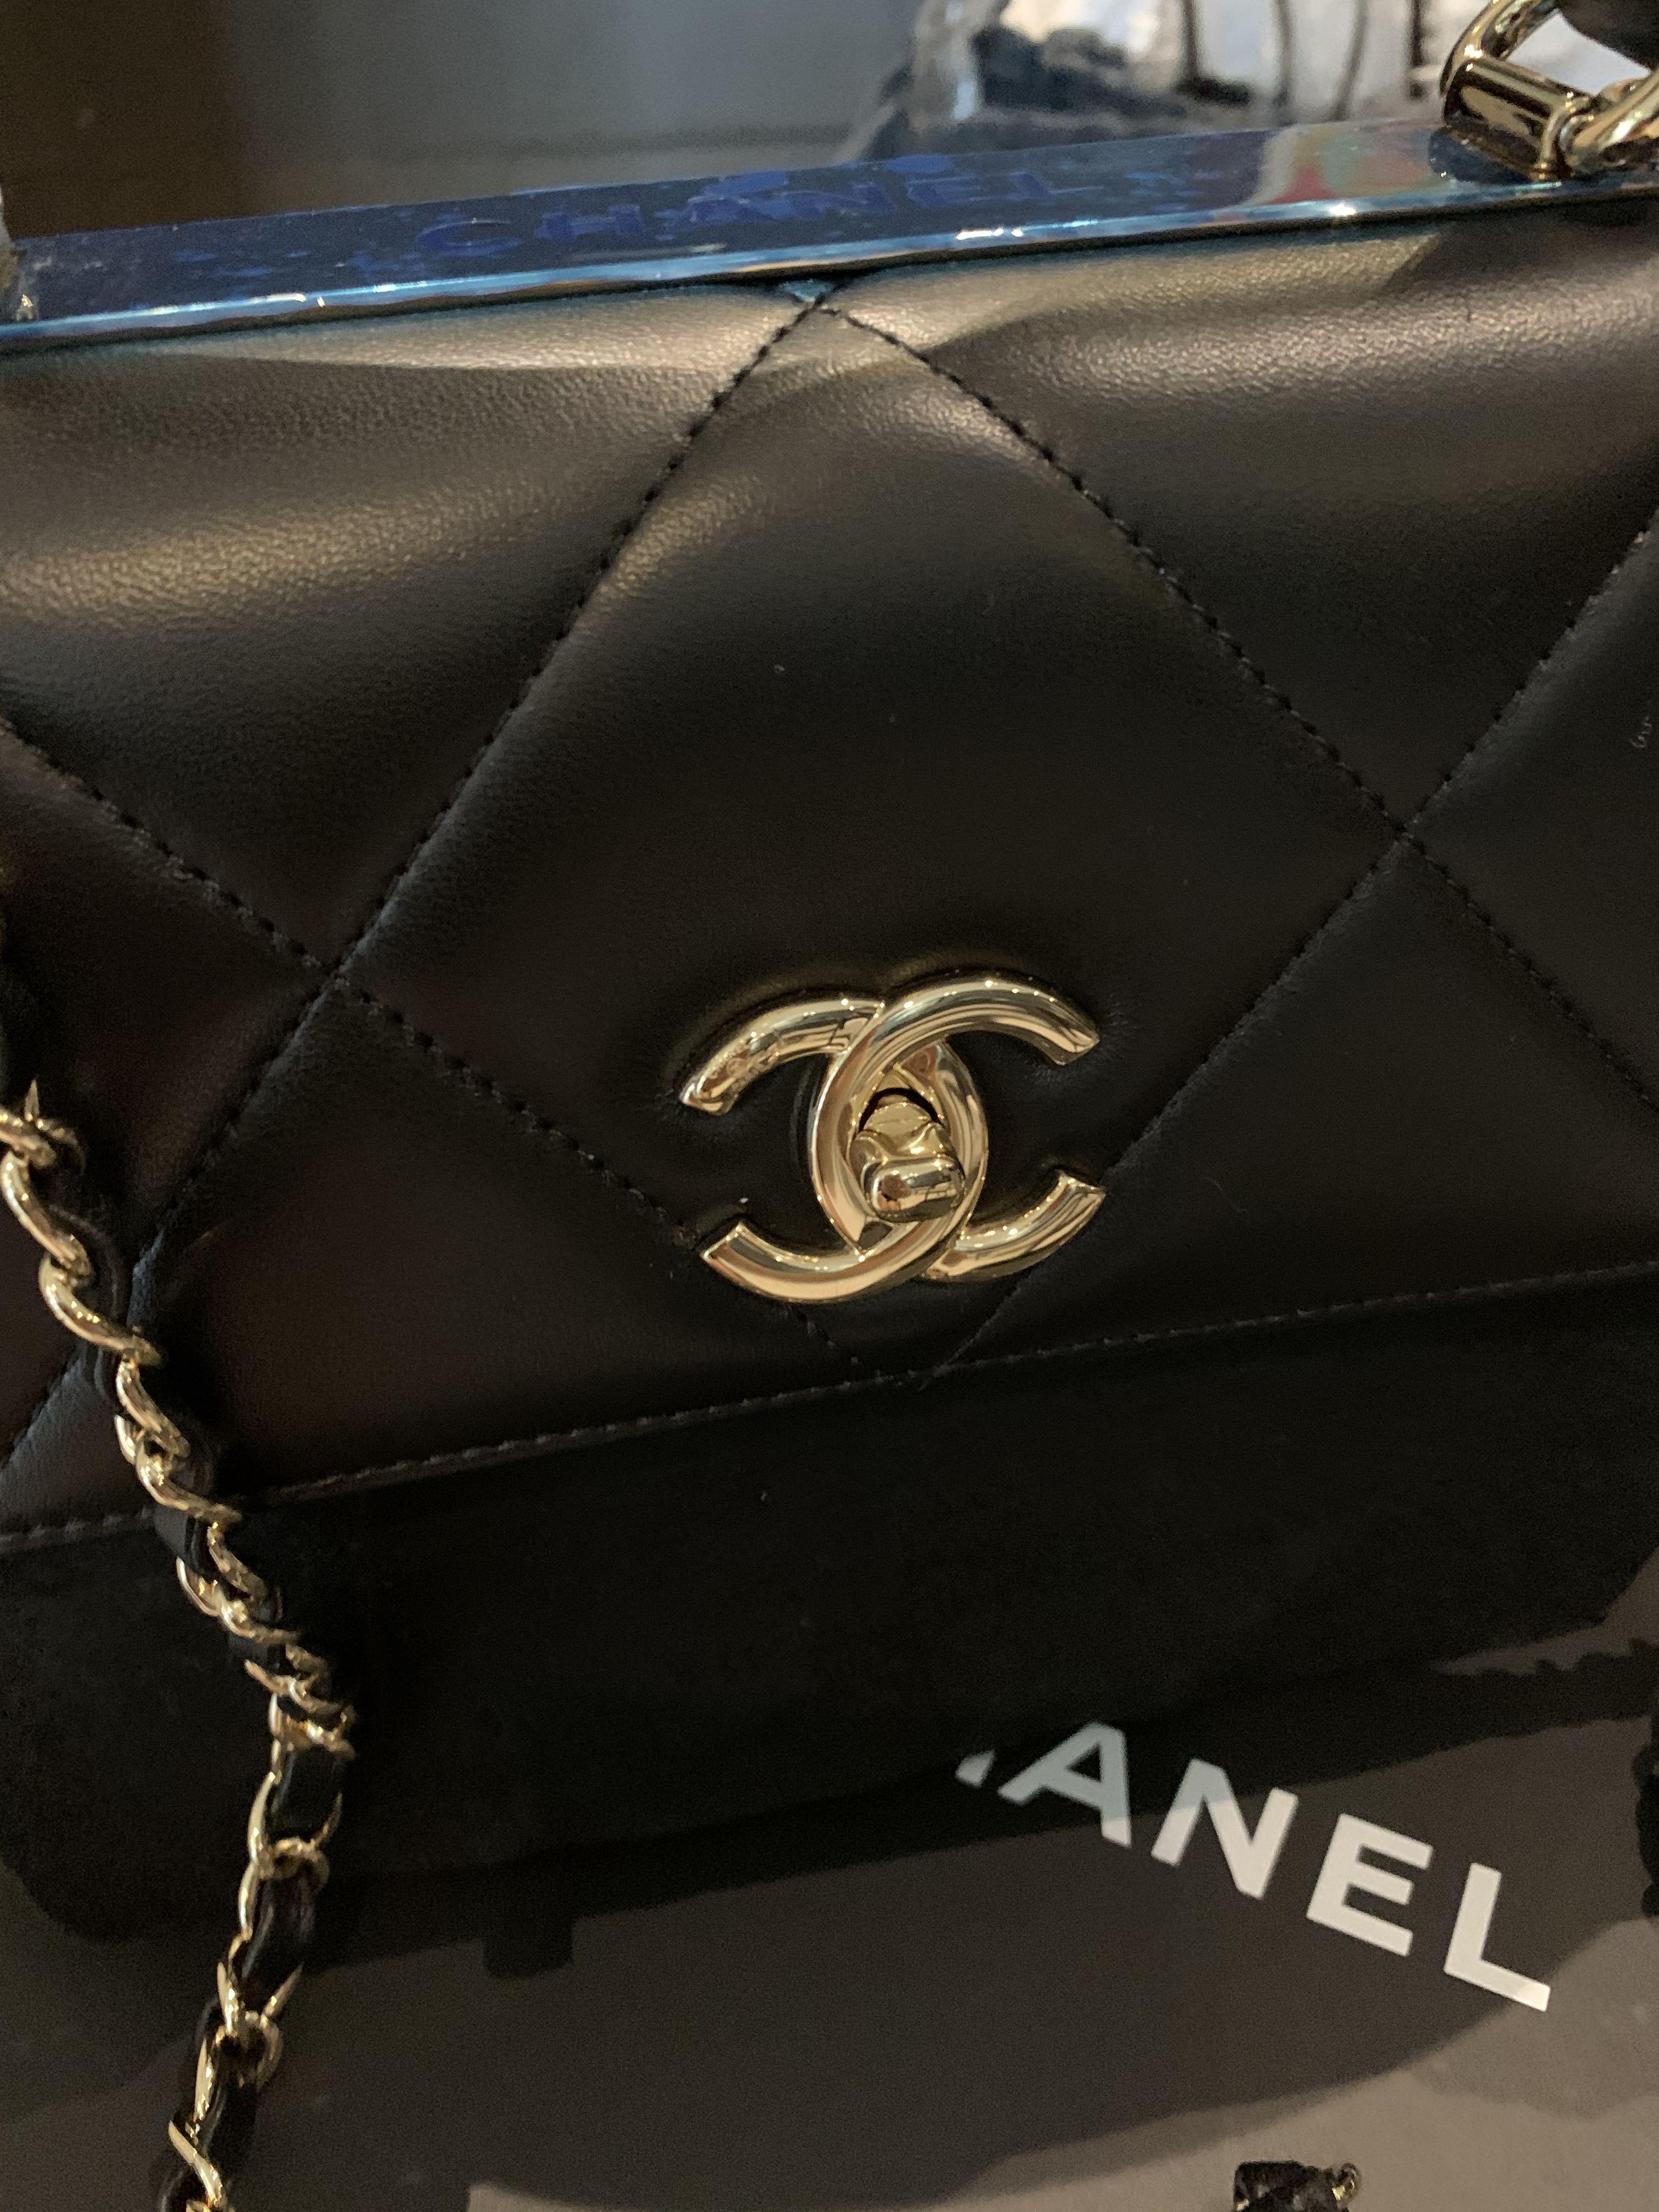 How to Spot The Real from the Fake – A Guide To Recognizing Counterfeit  Chanel Products